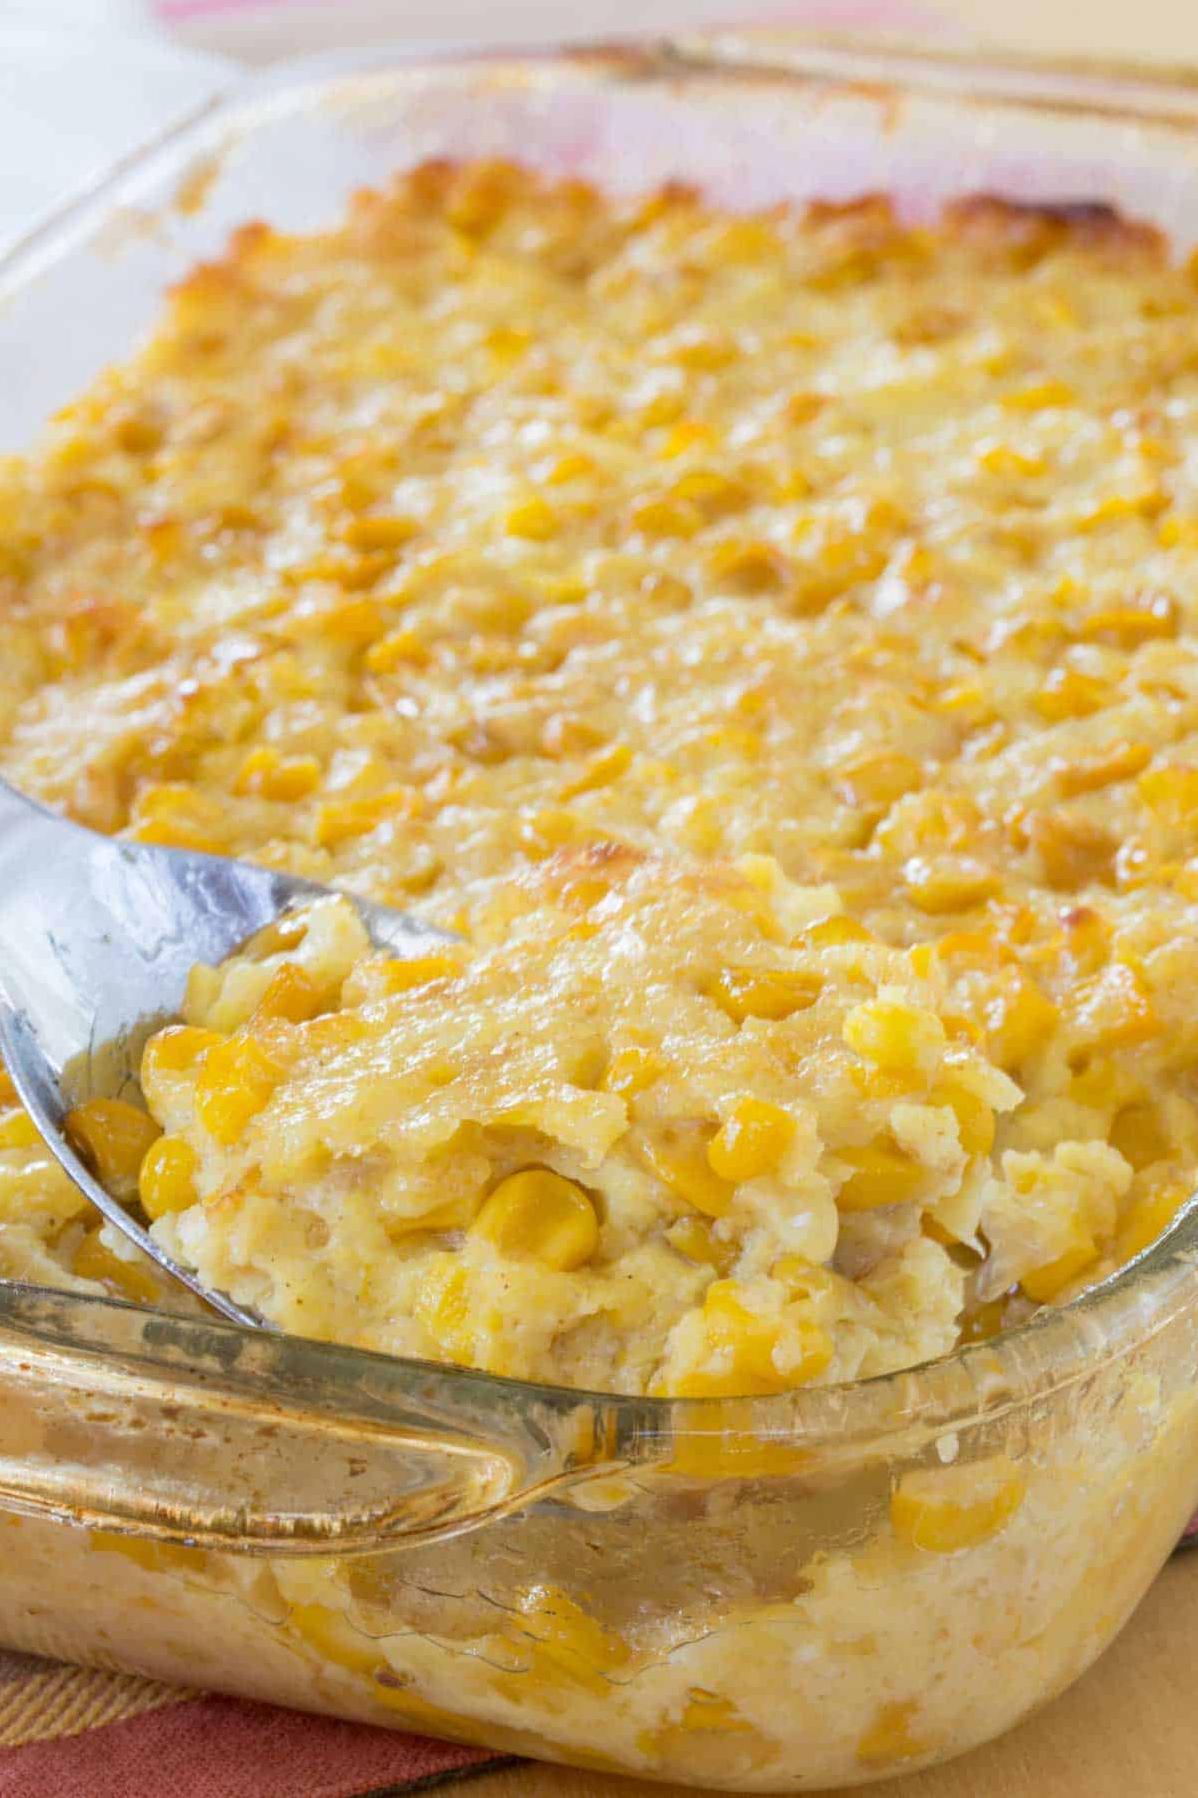  This hearty dish brings together the richness of butter, cream, and corn.